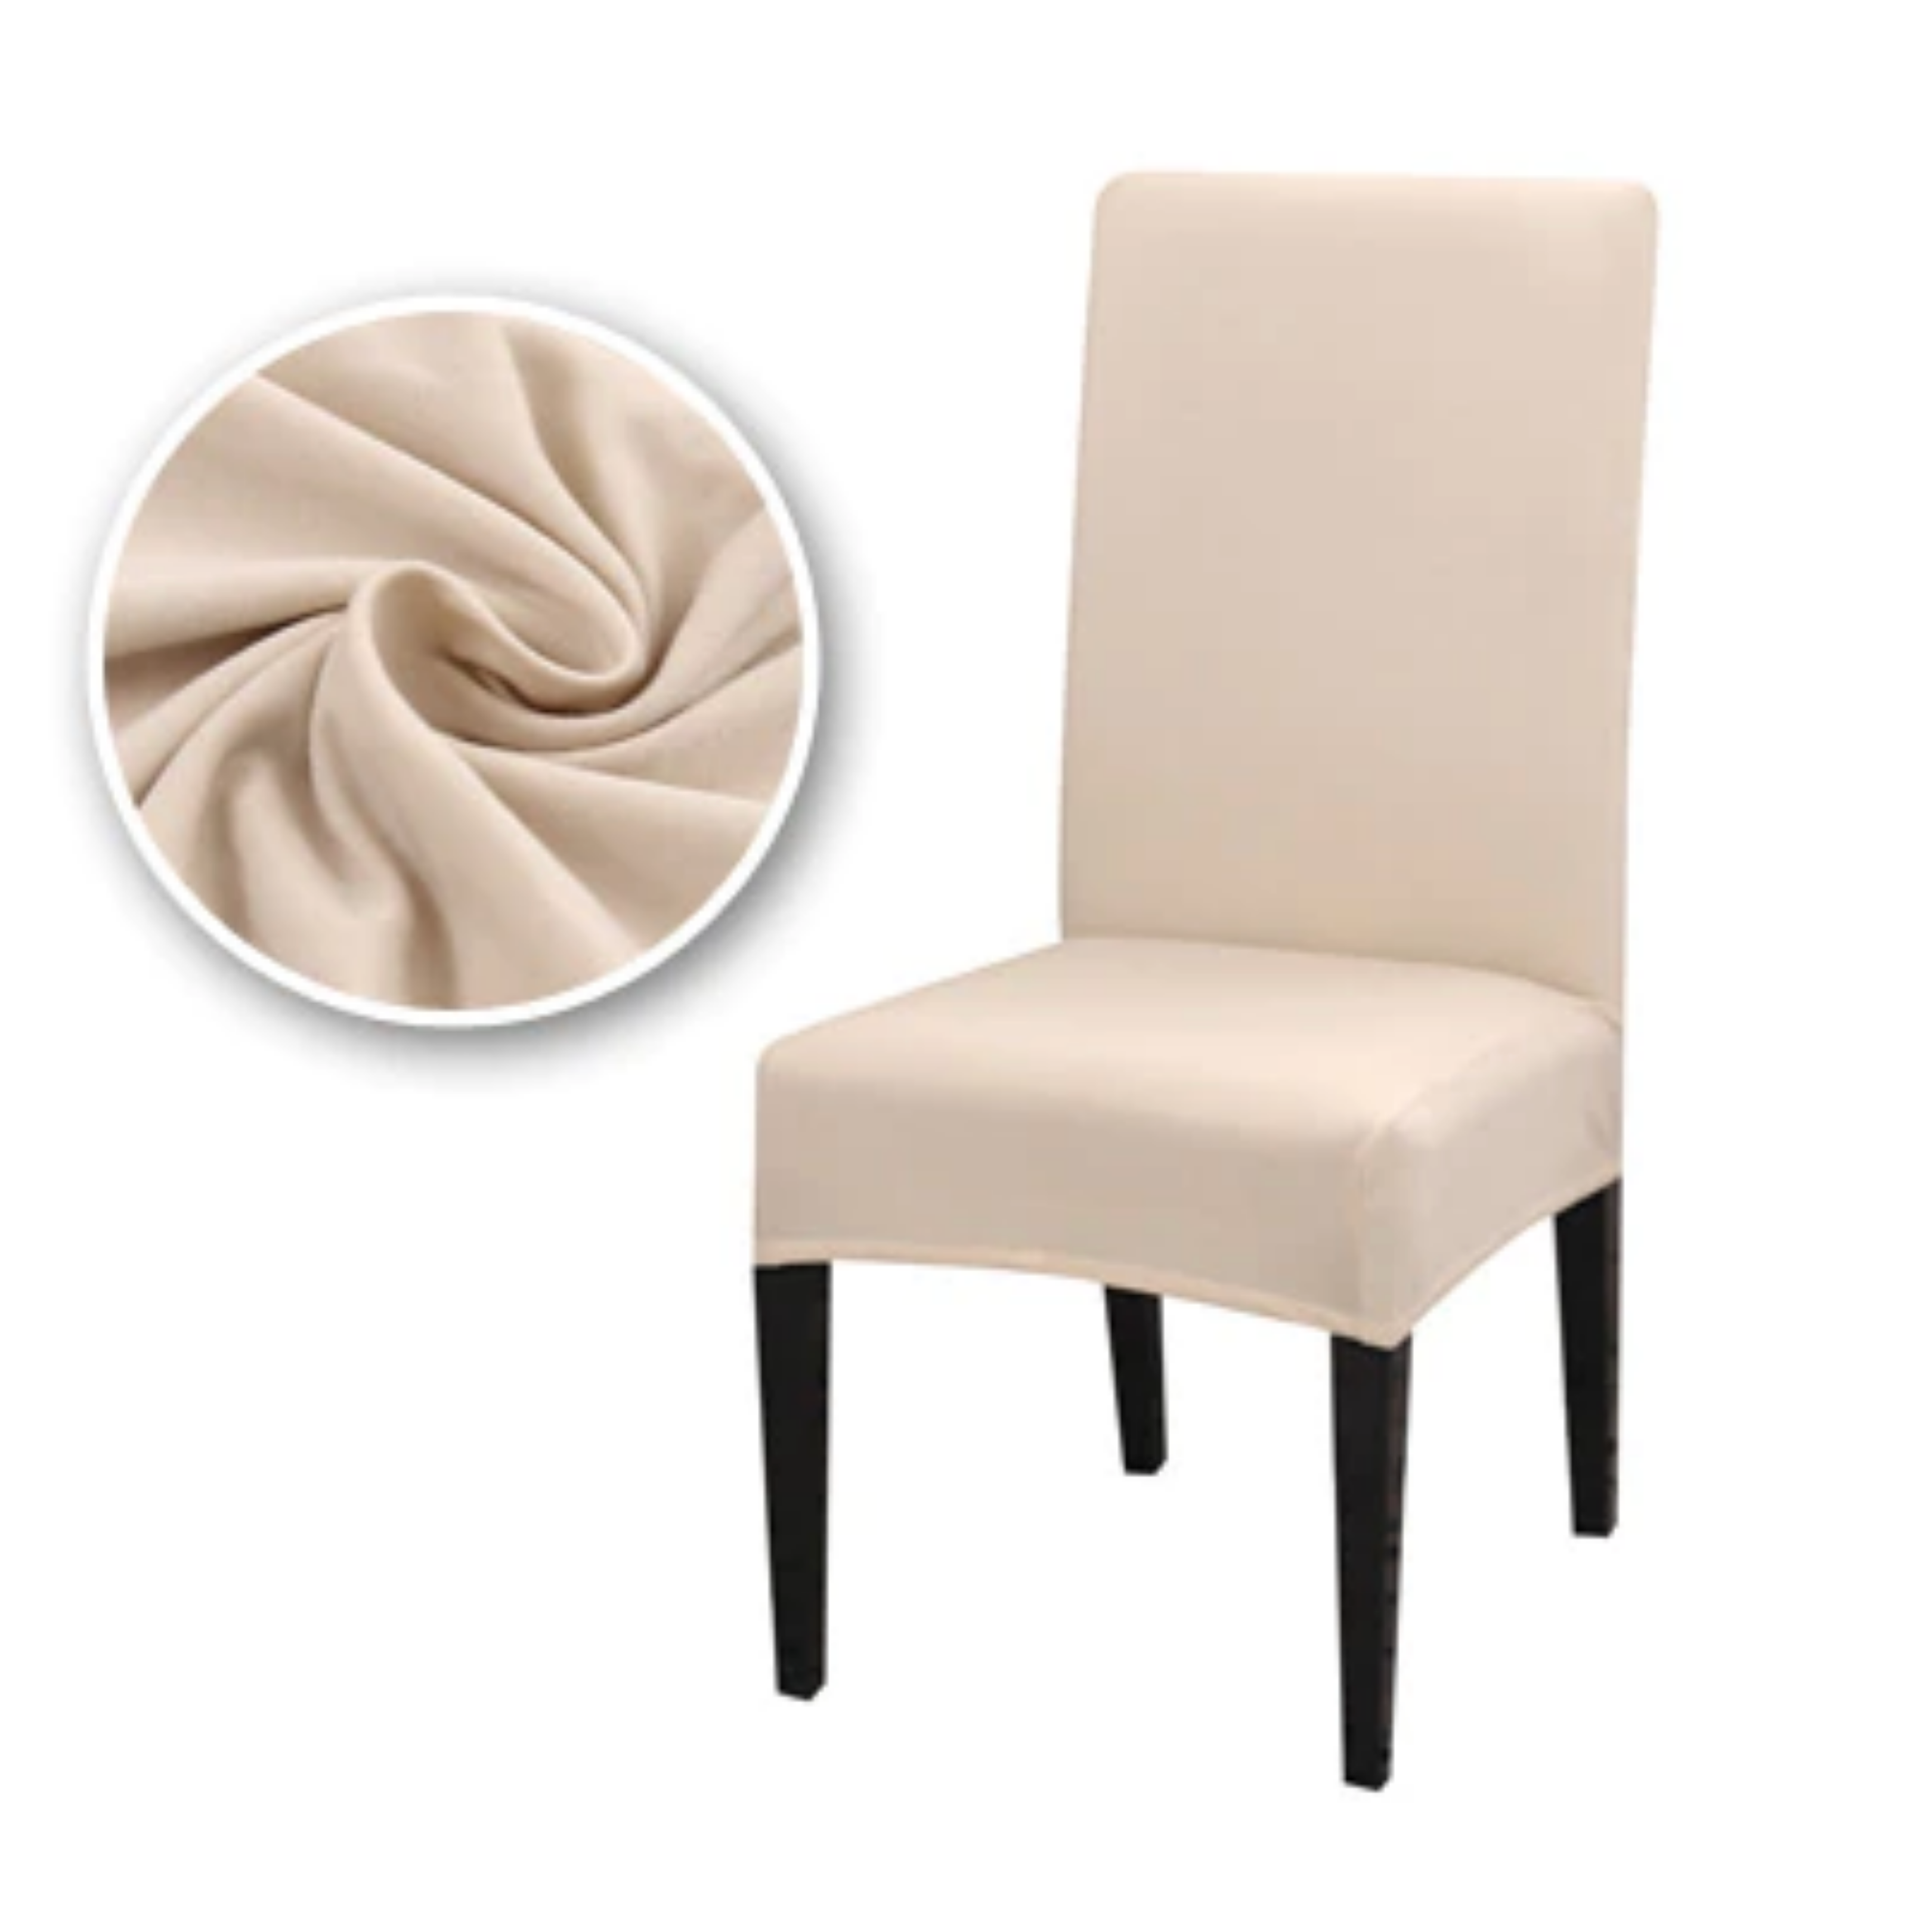 SLIP COVERIE Removable Seat Chair Cover